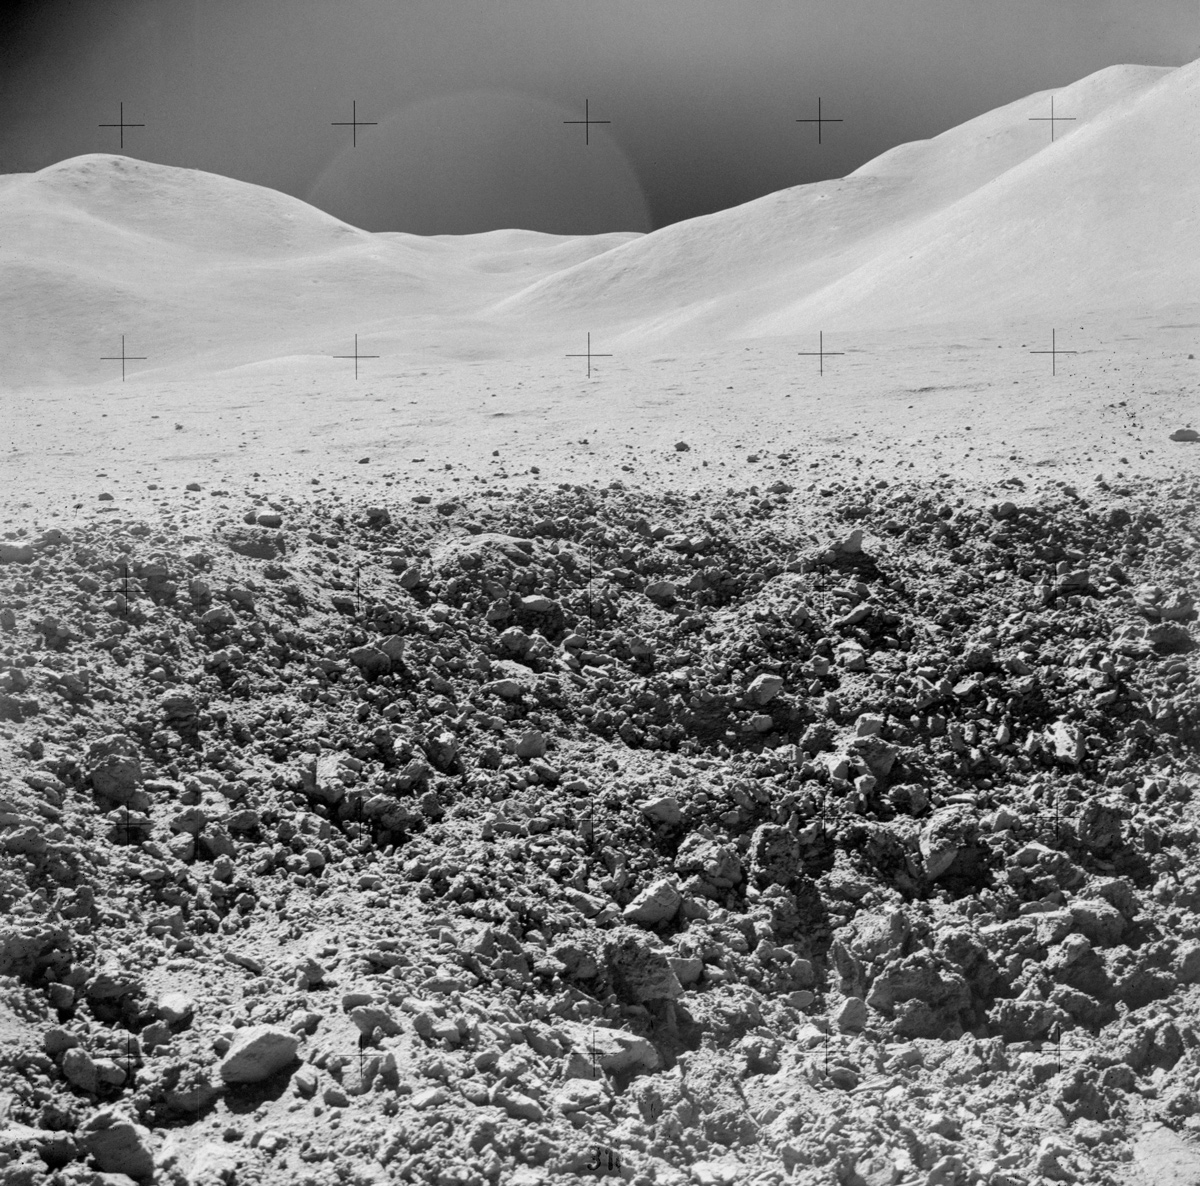 View from surface of lunar crater. The foreground looks like an expanse of rocky rubble. In the background, lighter-colored, dune-shaped hills rise under a dark sky. 